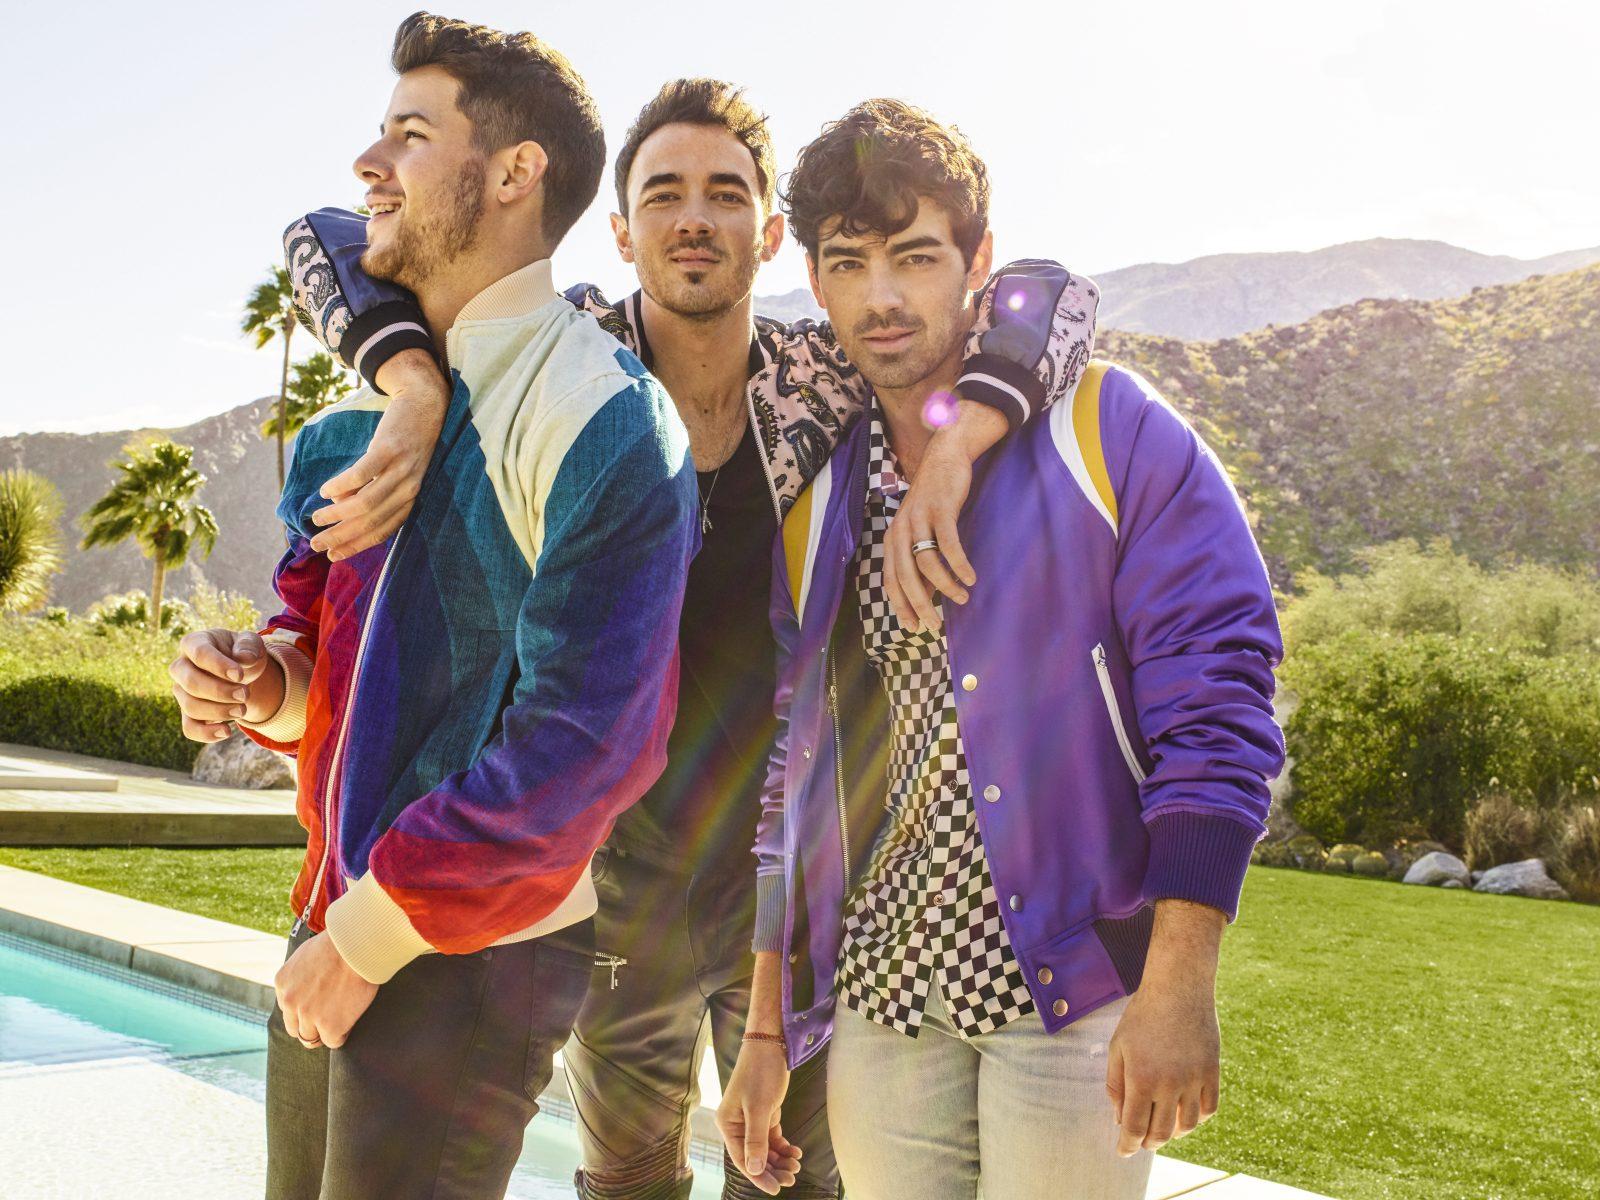 Jonas Brothers to perform at KeyBank Center